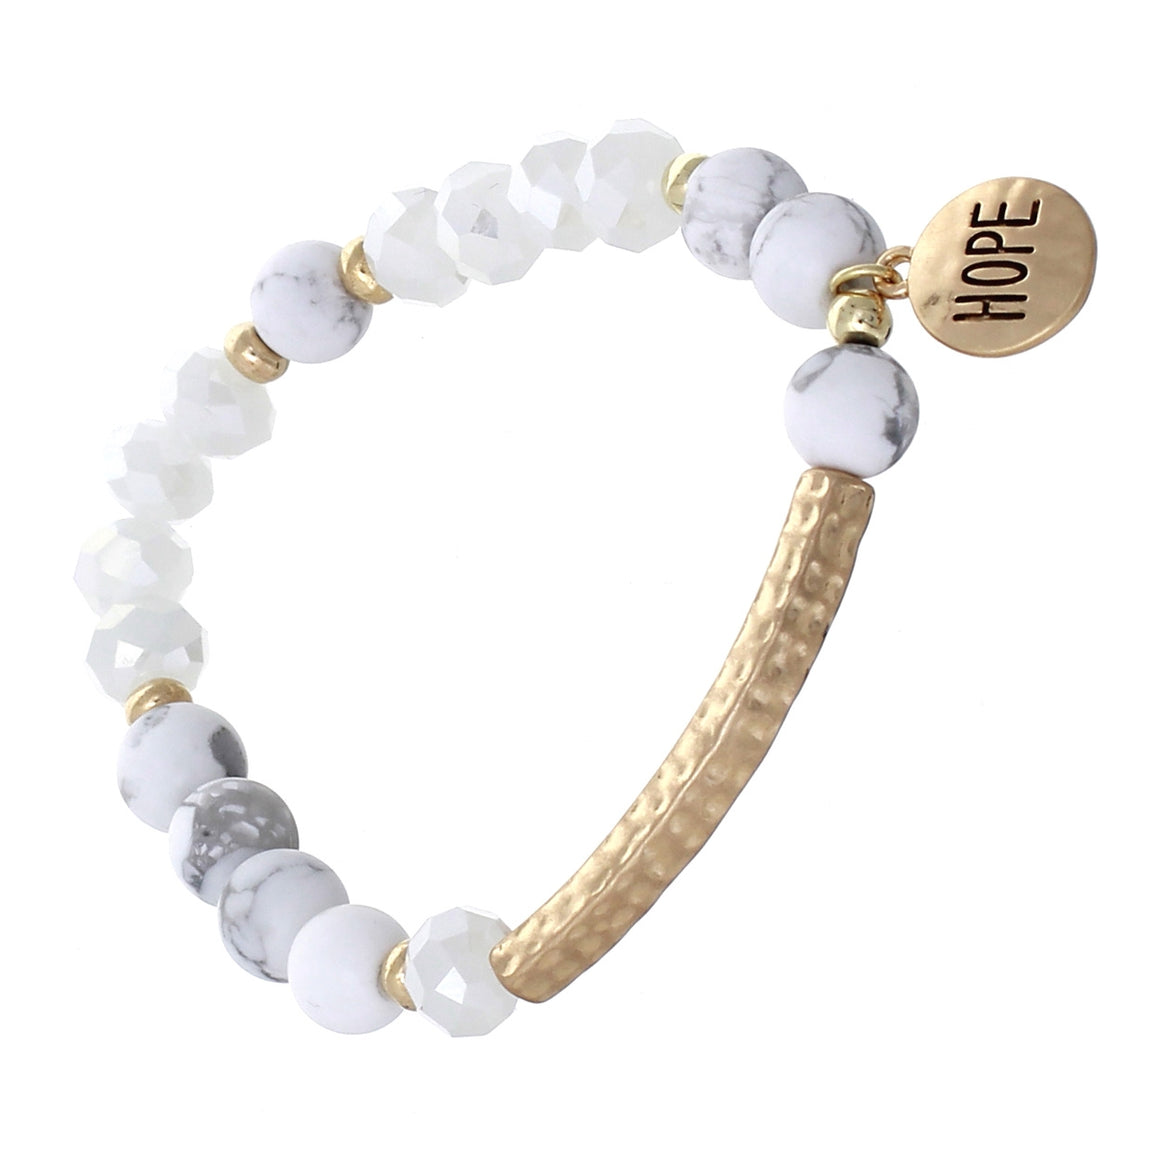 "Hope" Natural Stone Bracelet with Charm